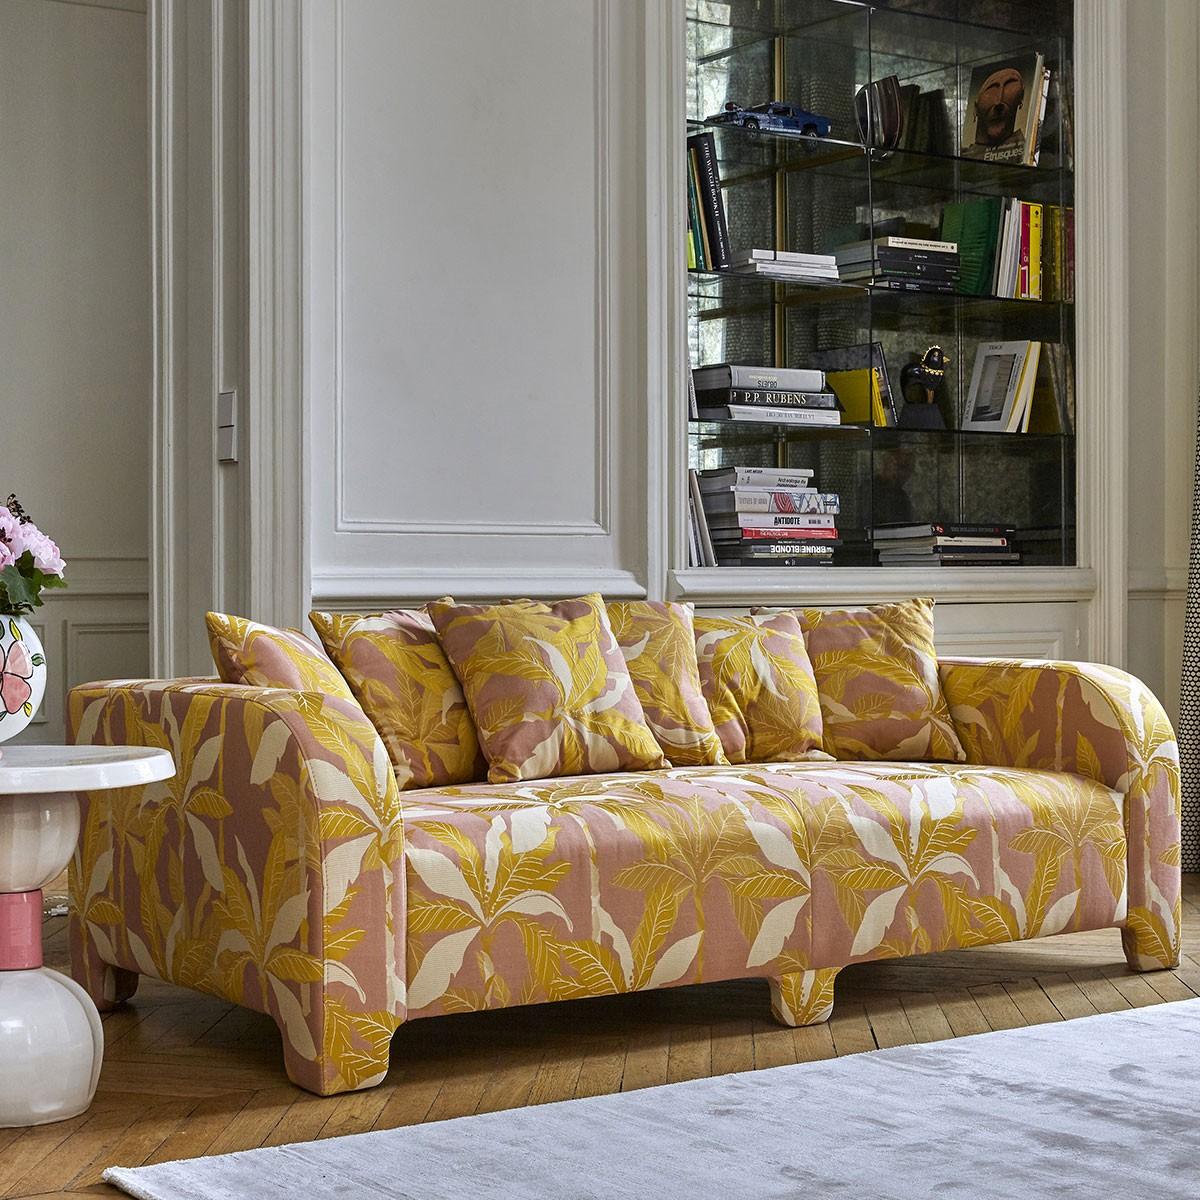 Popus Editions Graziella 4 seater sofa in saffron zanzi linen fabric.

A foot that hides another. A cushion that hides another. A curve that hides another with contemporary lines and a base like a punctuation mark, this sofa gives pride of place